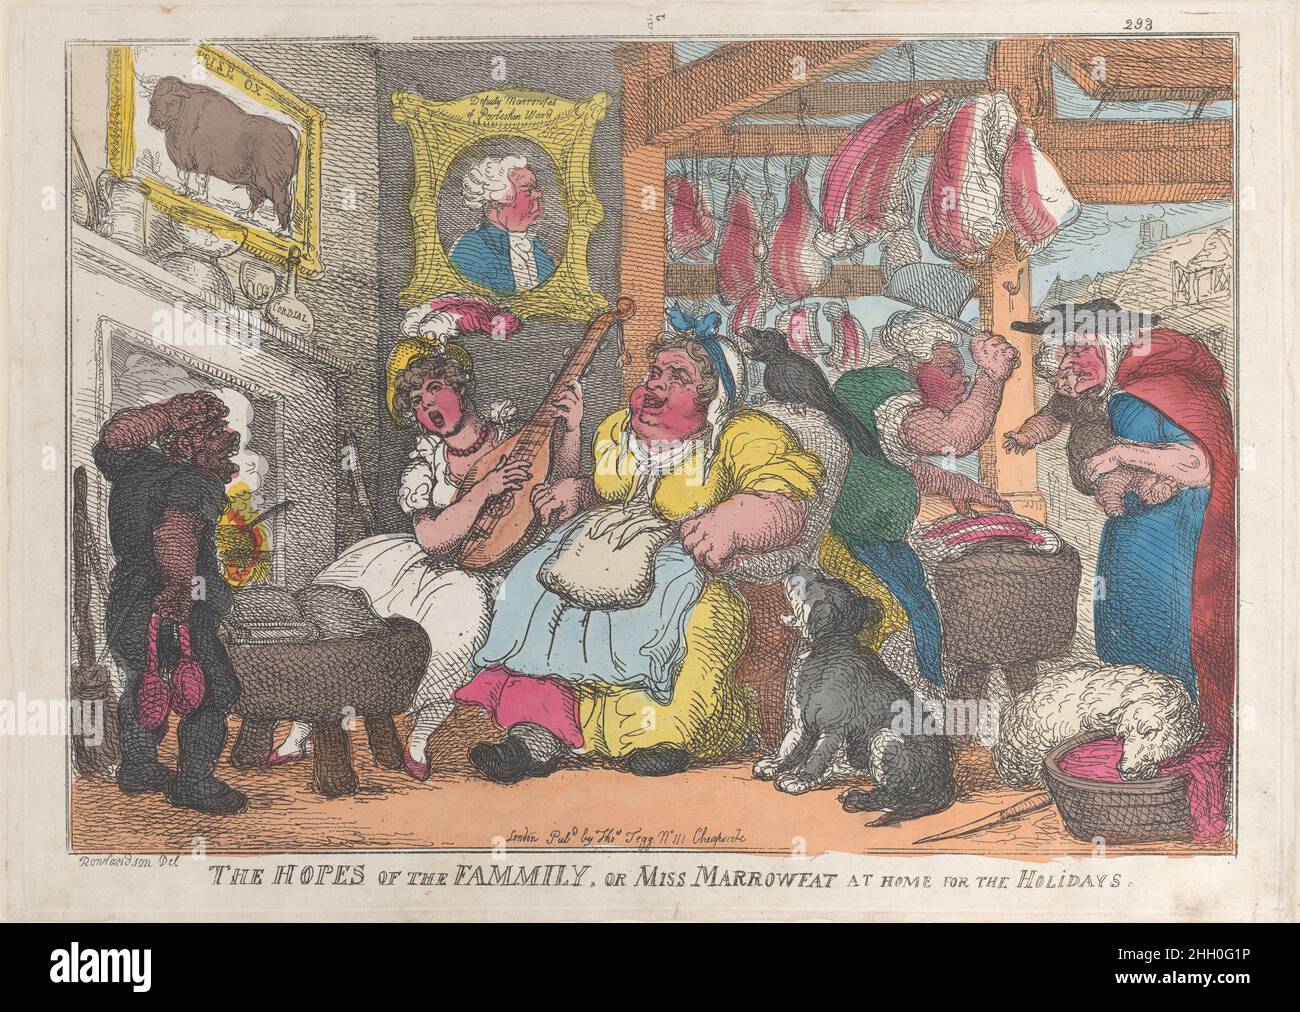 The Hopes of the Family, or Miss Marrowfat at Home for the Holidays 1809–13 Thomas Rowlandson Mrs. Marrowfat is seated in an armchair at center, enjoying the music being played next to her. A butcher is behind her at right selling cuts of meat.. The Hopes of the Family, or Miss Marrowfat at Home for the Holidays. Thomas Rowlandson (British, London 1757–1827 London). 1809–13. Hand-colored etching. Thomas Tegg (British, 1776–1846). Prints Stock Photo